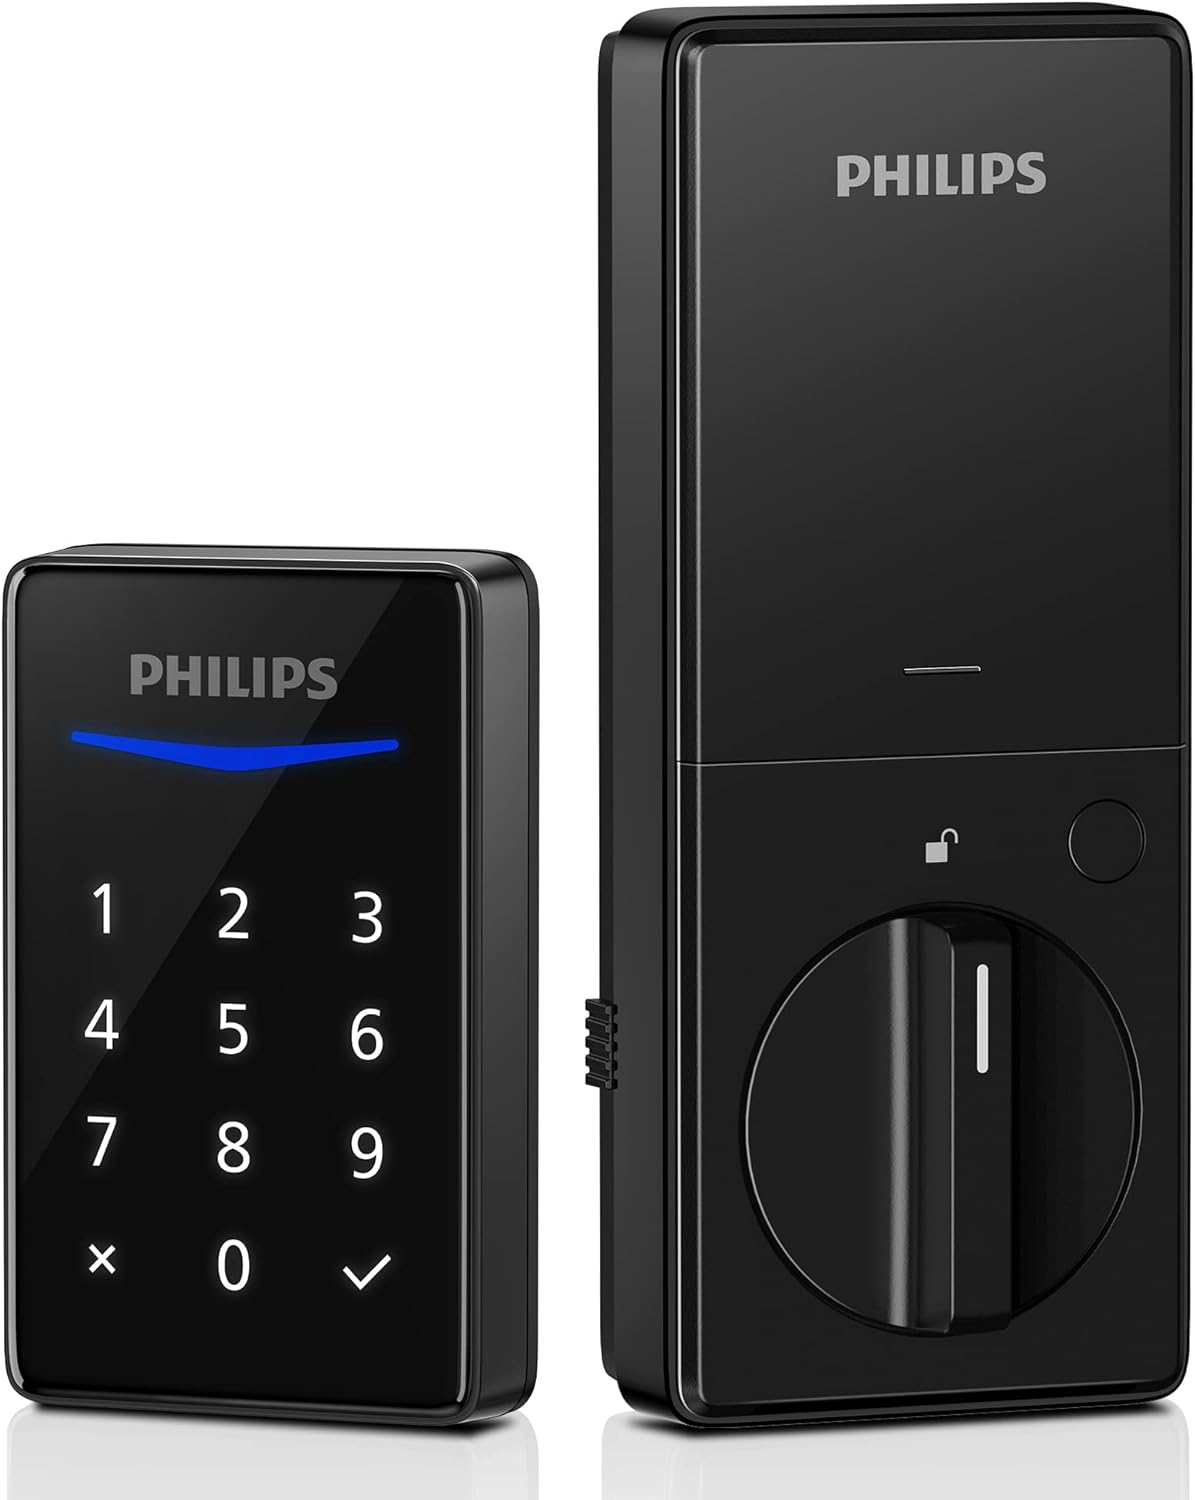 Philips Keyless Entry Door Lock - Generate One-time Code Remotely Nonconnected- Touchscreen Keypad Standalone Deadbolt Lock - Matte Black